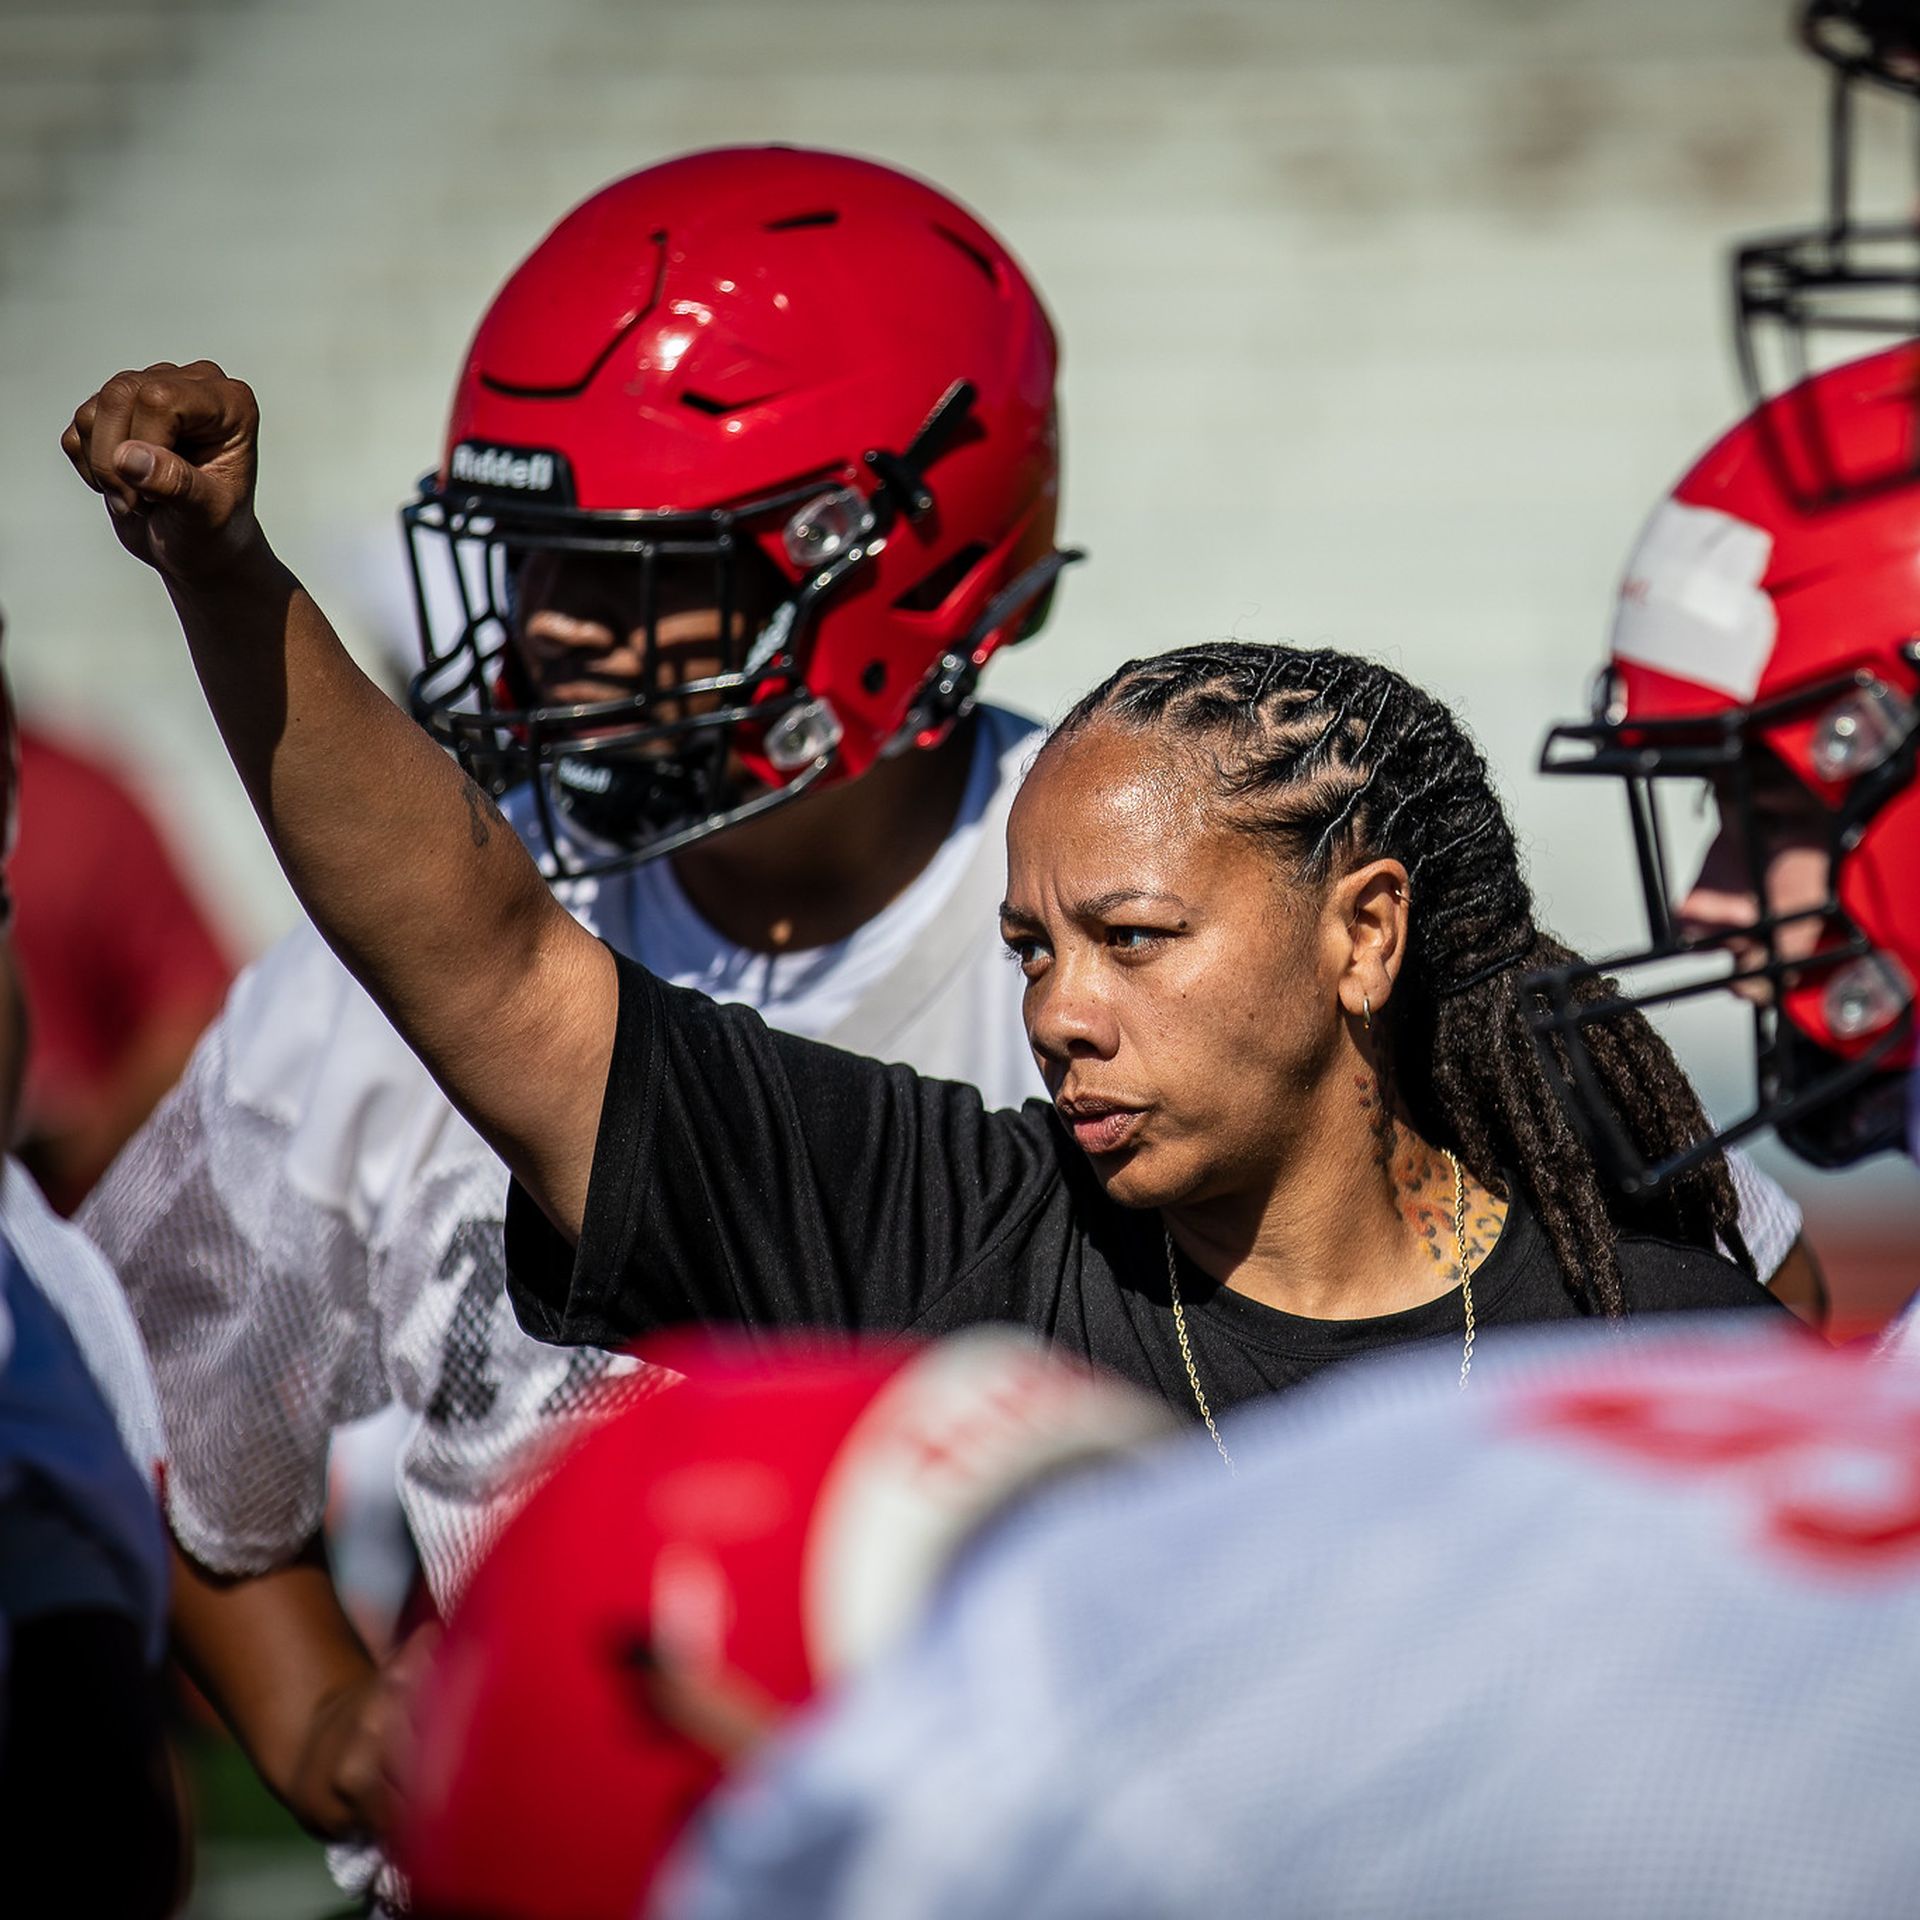 Des Moines' first-ever female football coach leads the East Scarlets -  Axios Des Moines